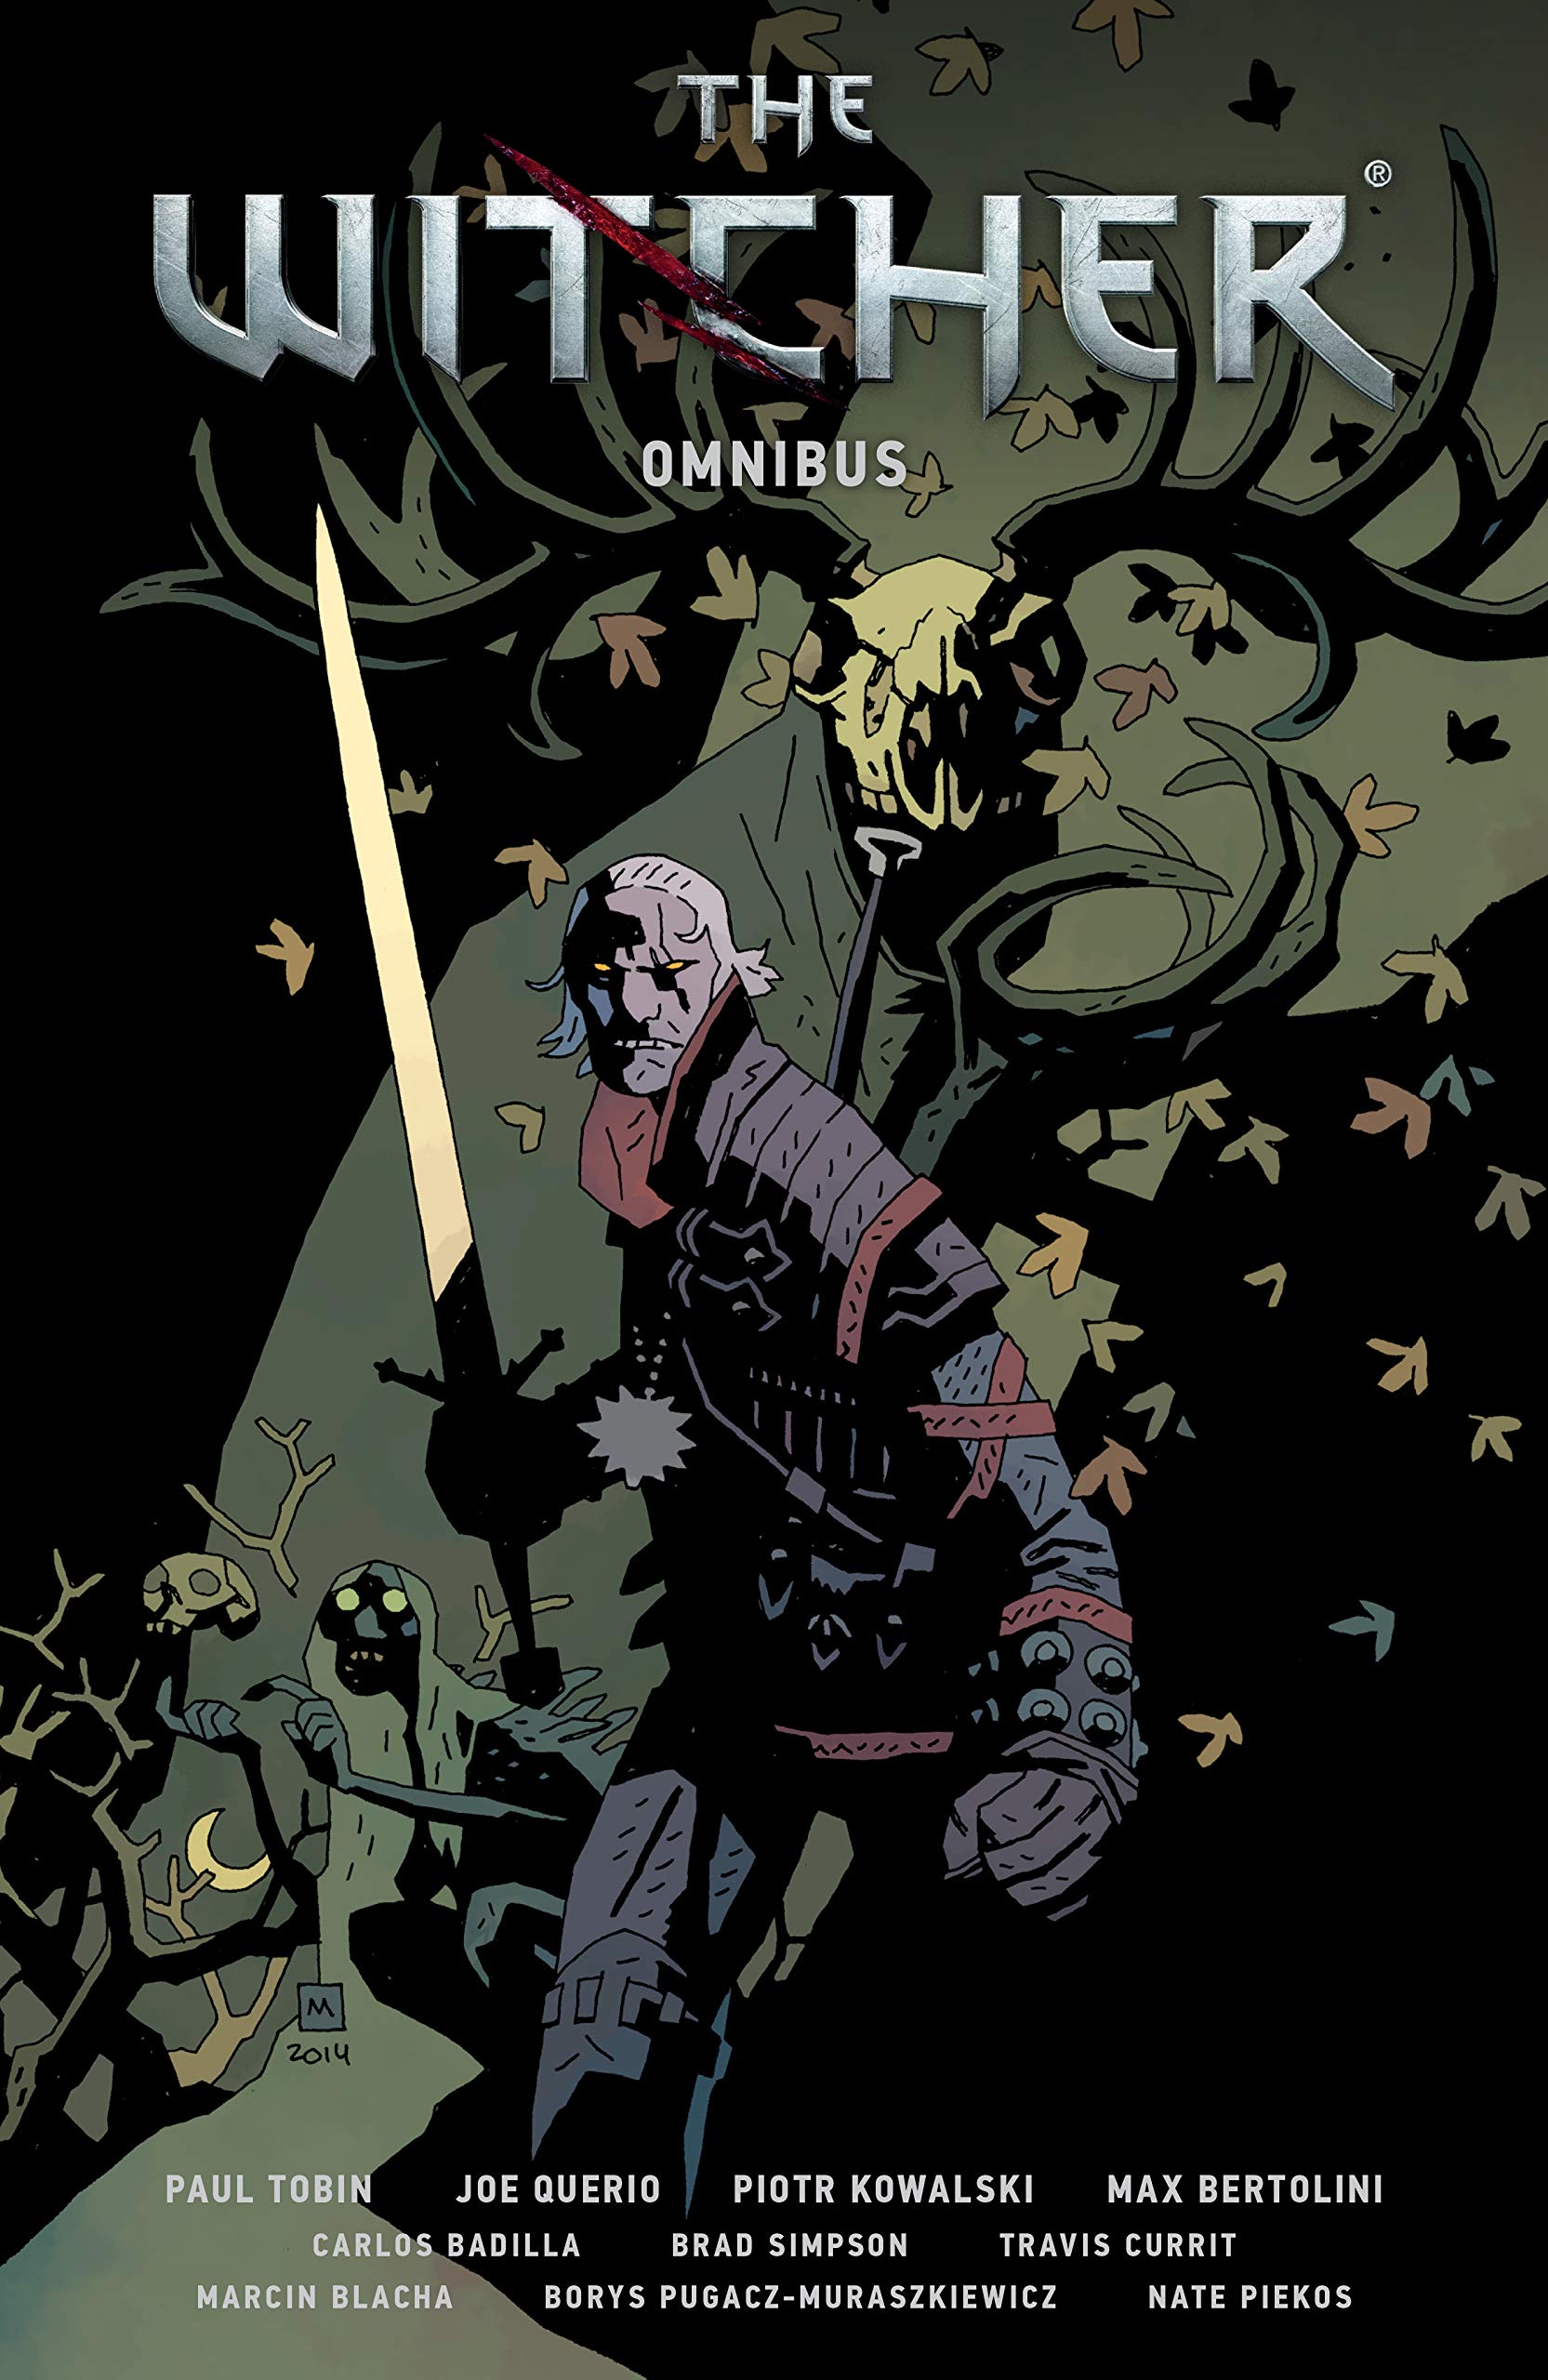 The Witcher Omnibus cover